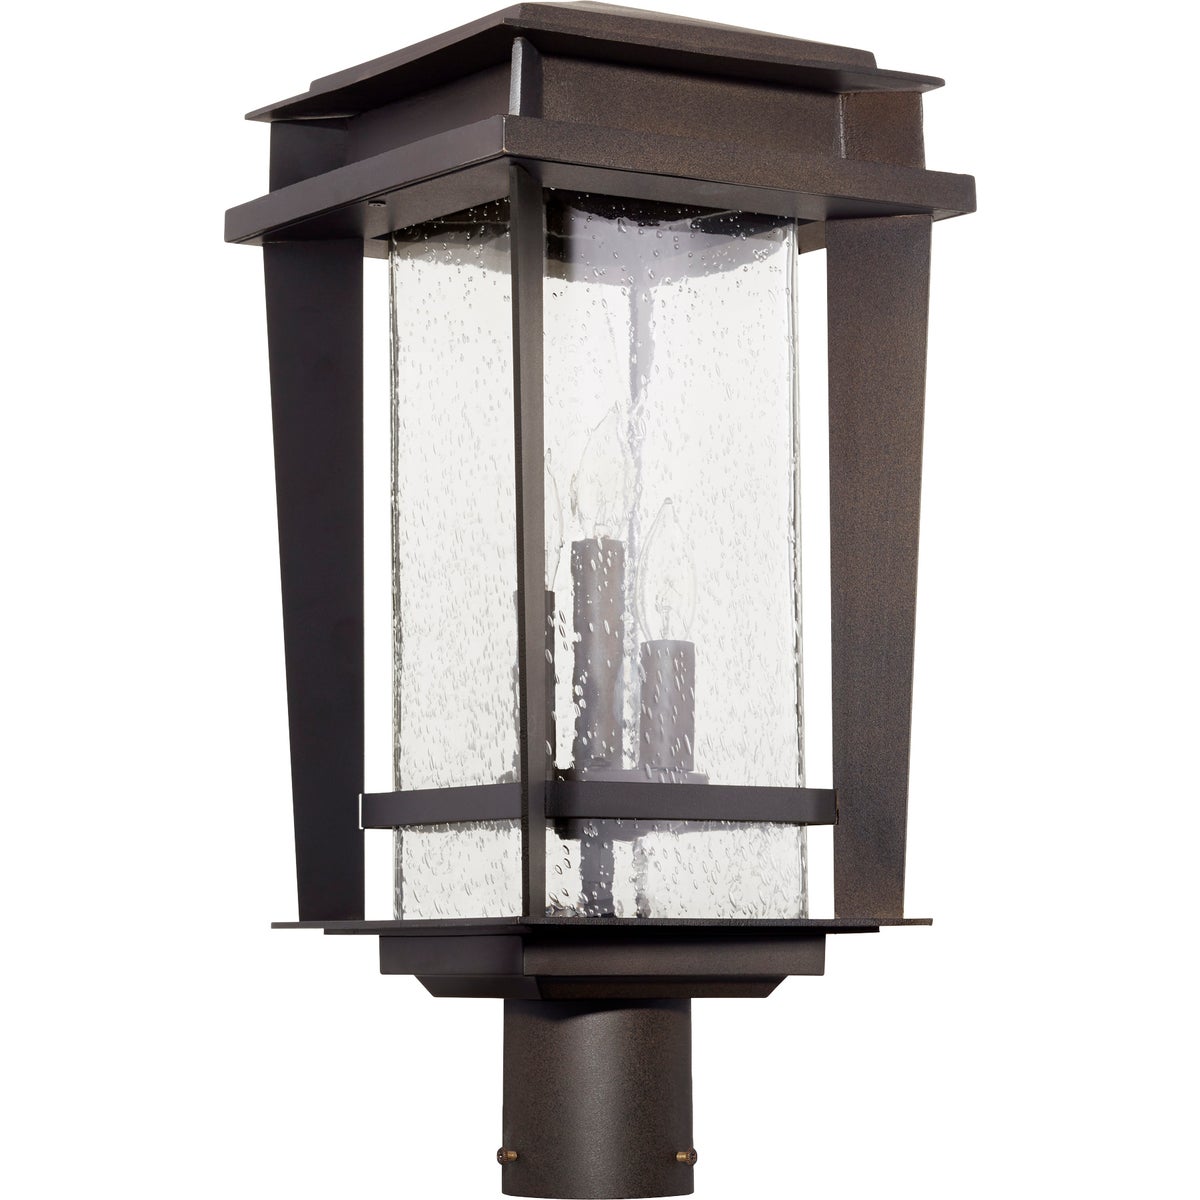 Bronze outdoor post light with a glass shade, adding mid-century modern flair to your home's exterior. Crafted for damp or wet environments, this durable metal fixture is safe outside.